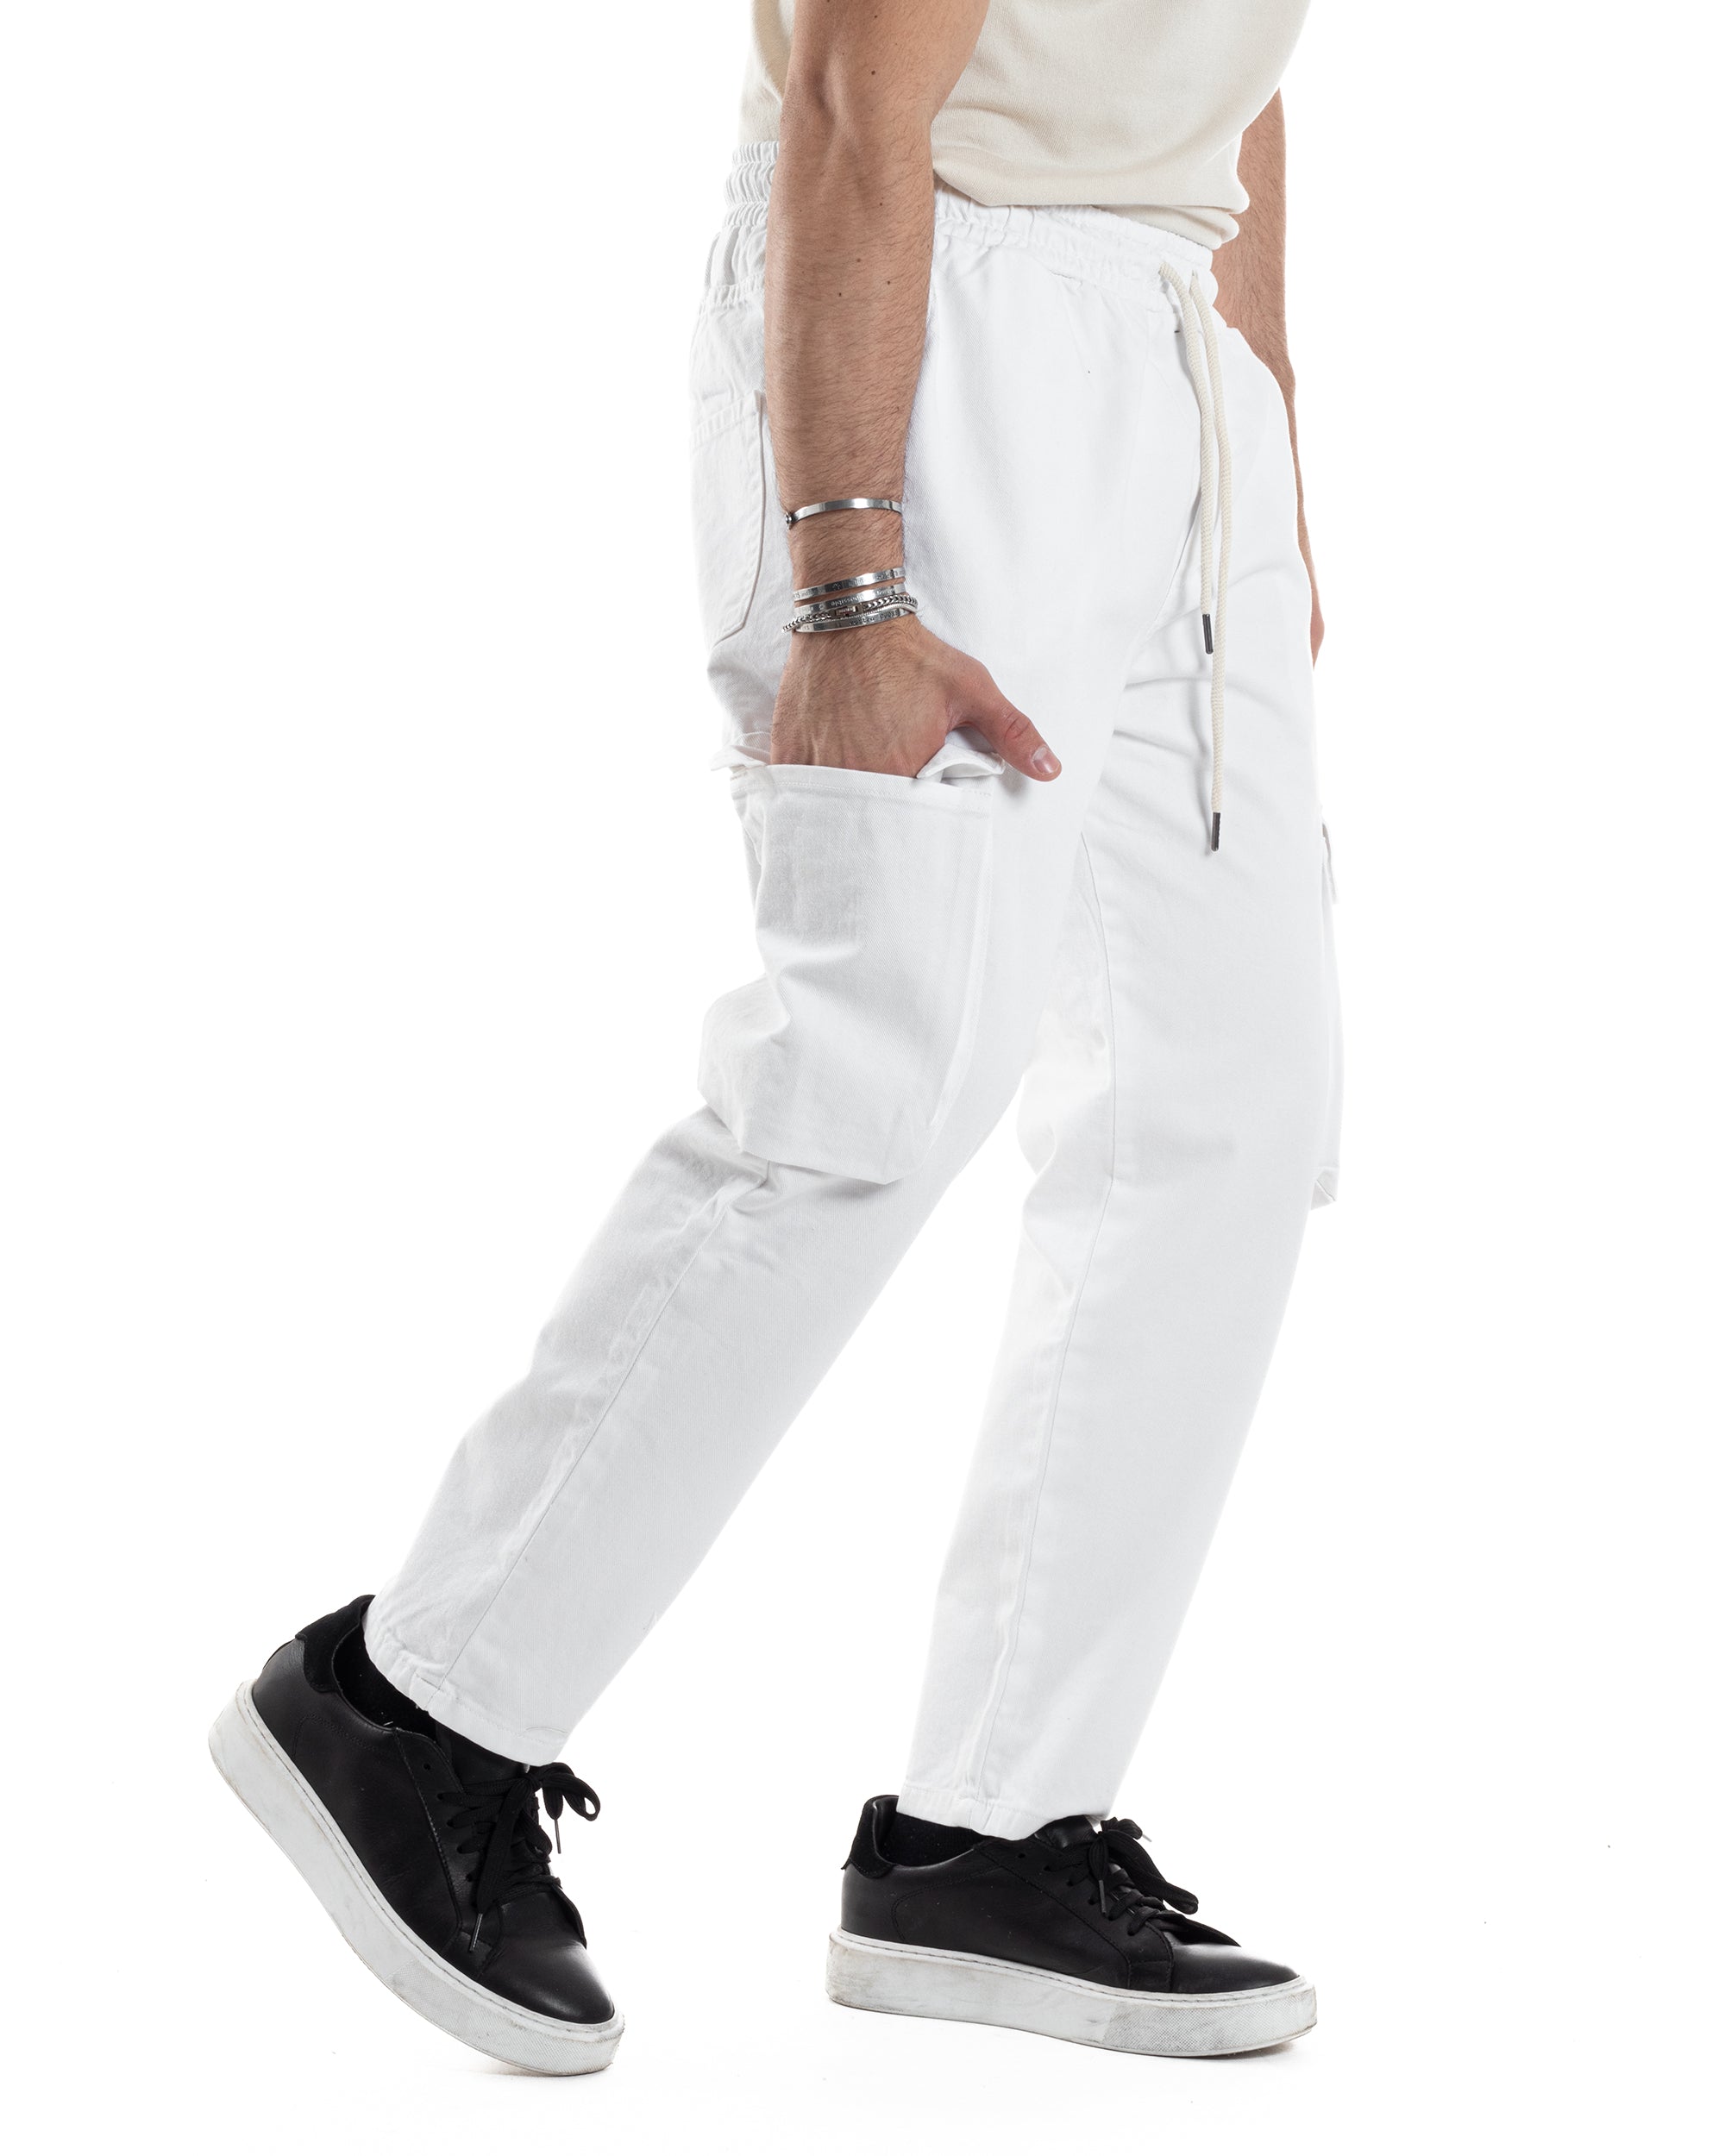 Men's Jeans Trousers Regular Fit Beige Trousers With Casual Rips GIOSAL-P3528A